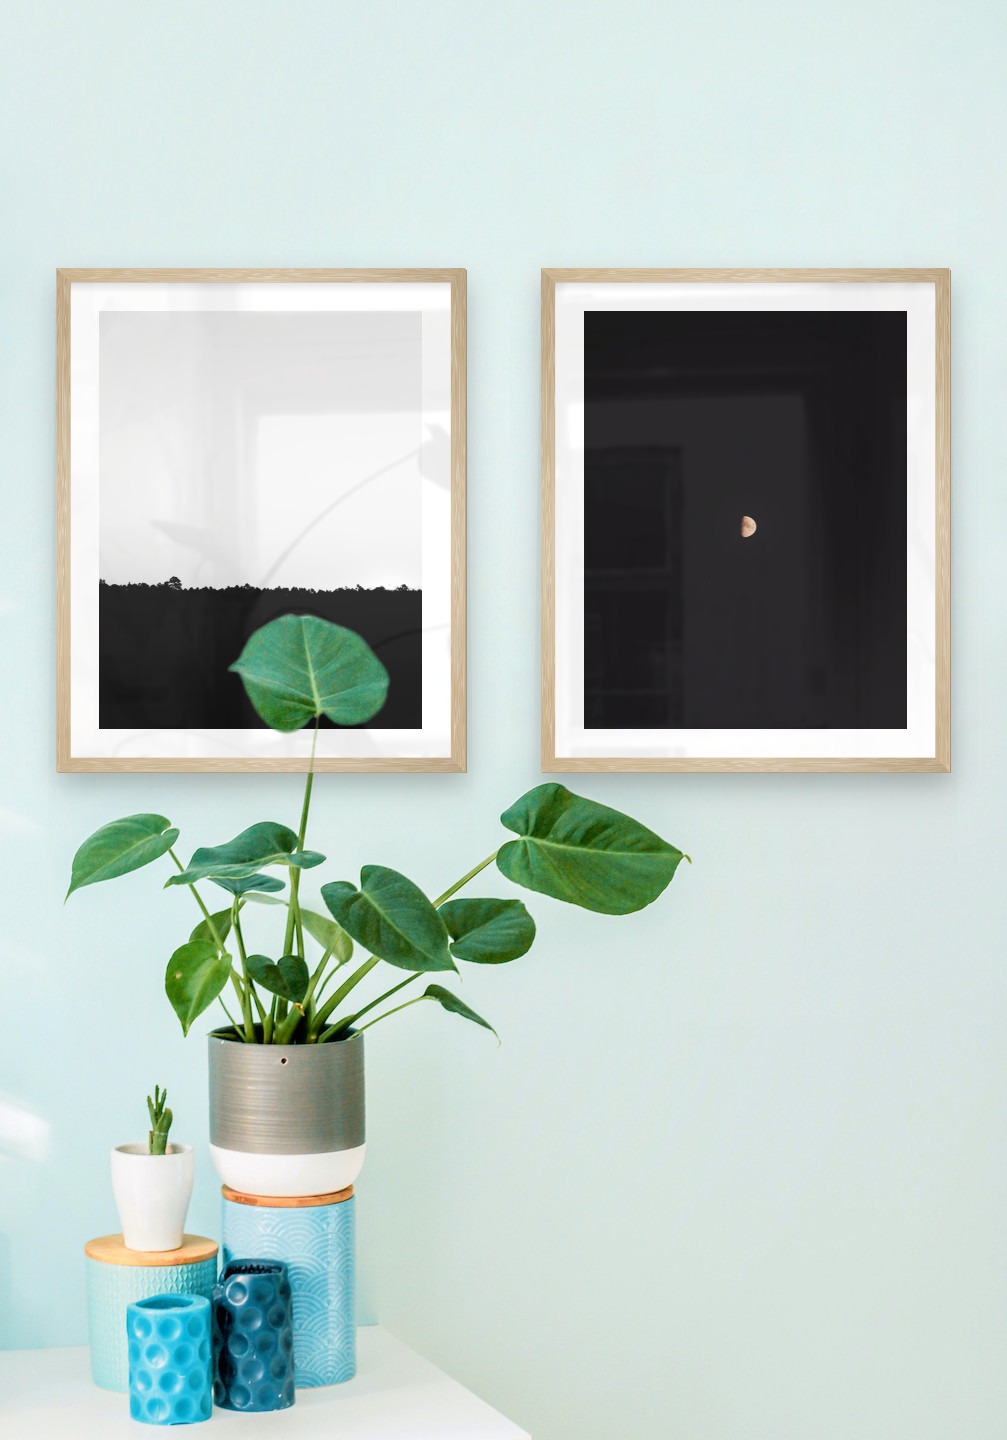 Gallery wall with picture frames in wood in sizes 40x50 with prints "Sky above trees" and "The moon"